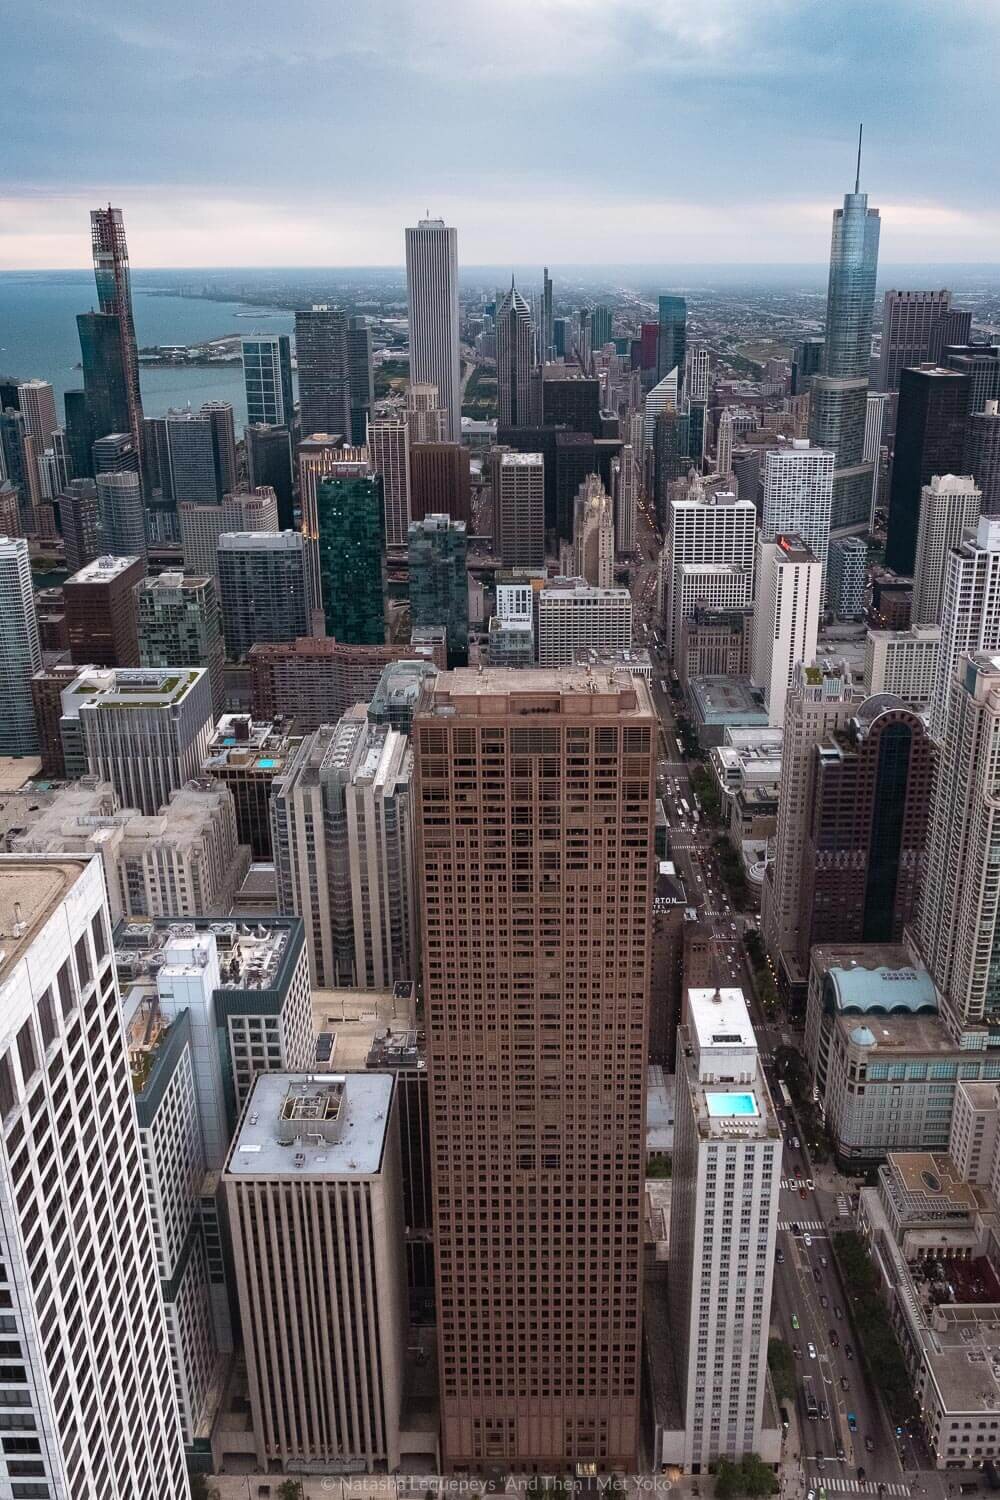 Views from 360 Chicago. Travel photography and guide by © Natasha Lequepeys for "And Then I Met Yoko". #chicago #usa #travelblog #travelphotography